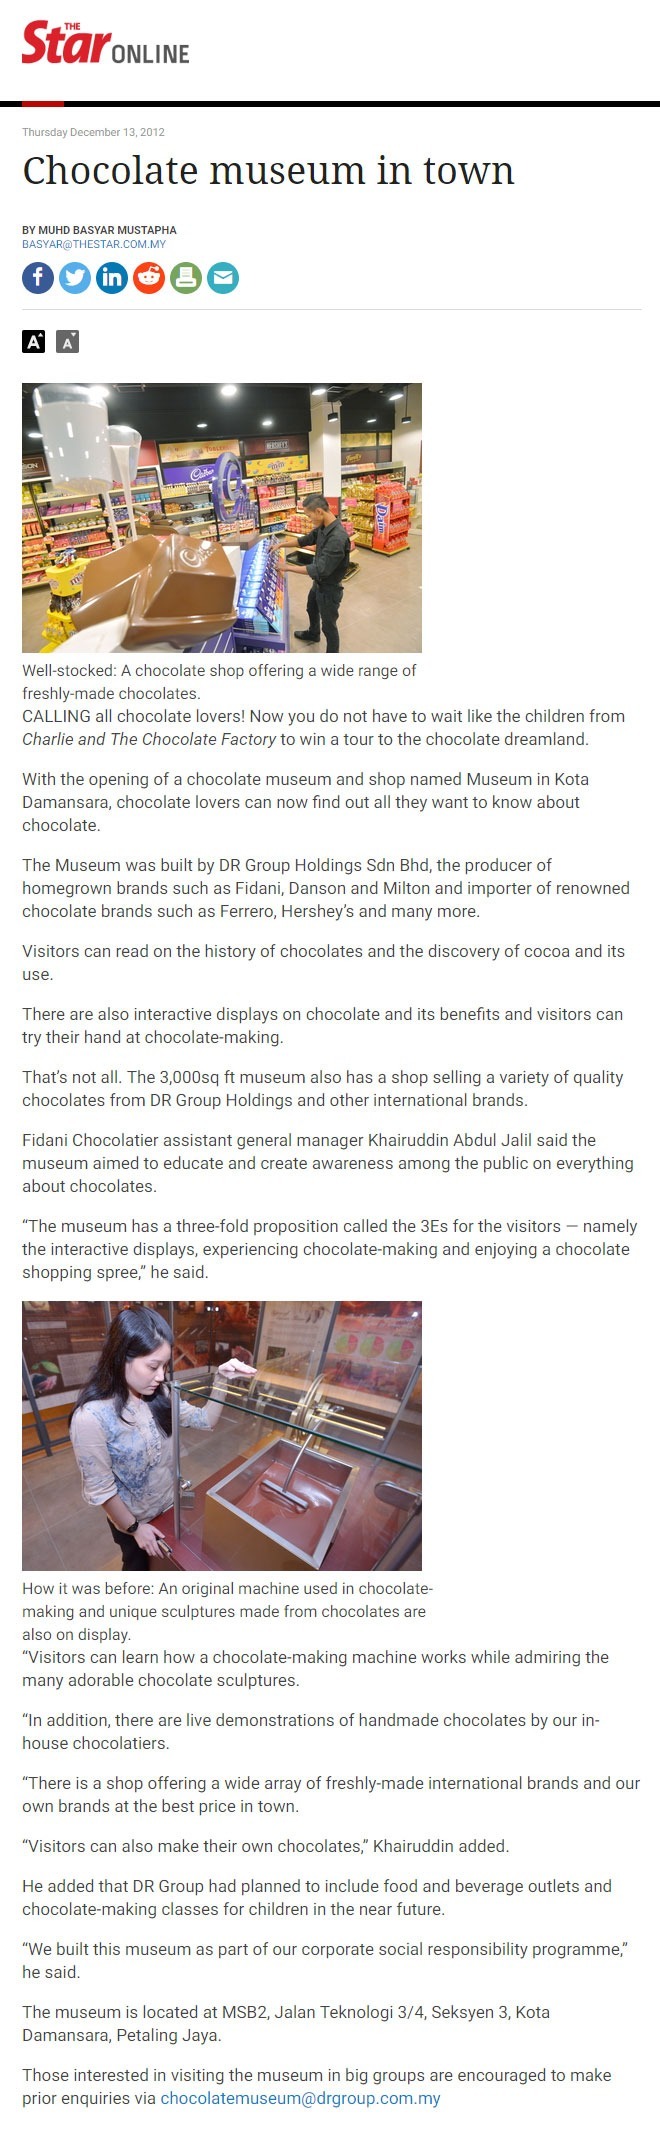 Chocolate museum in town